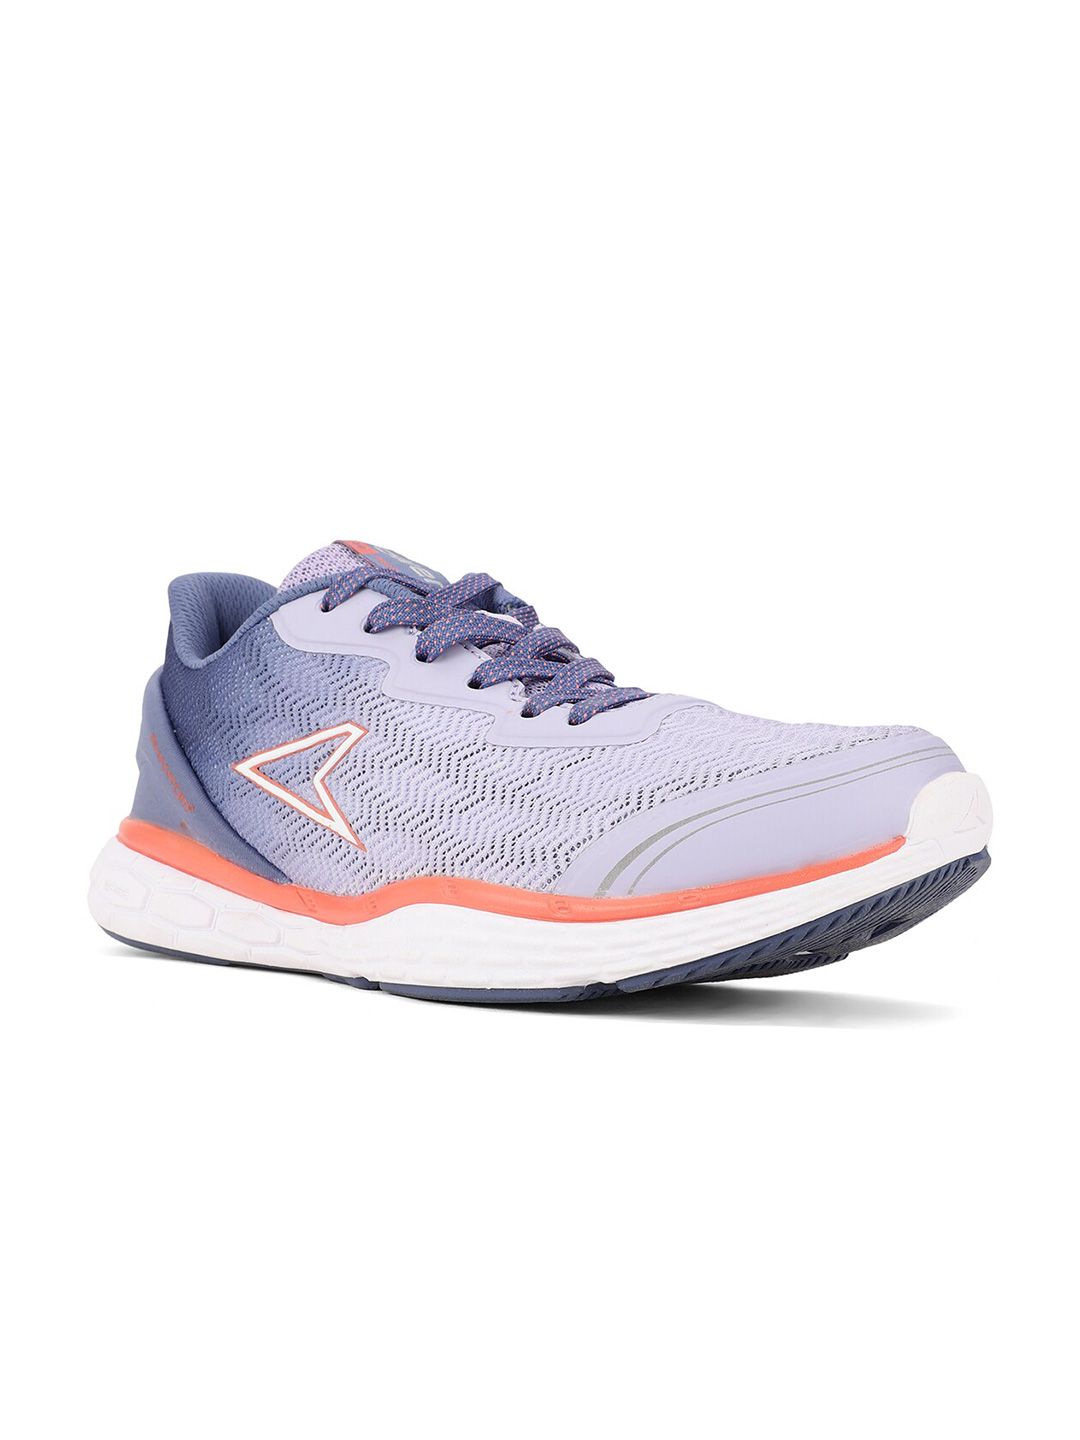 Power Women Blue Textile Running Non-Marking Shoes Price in India